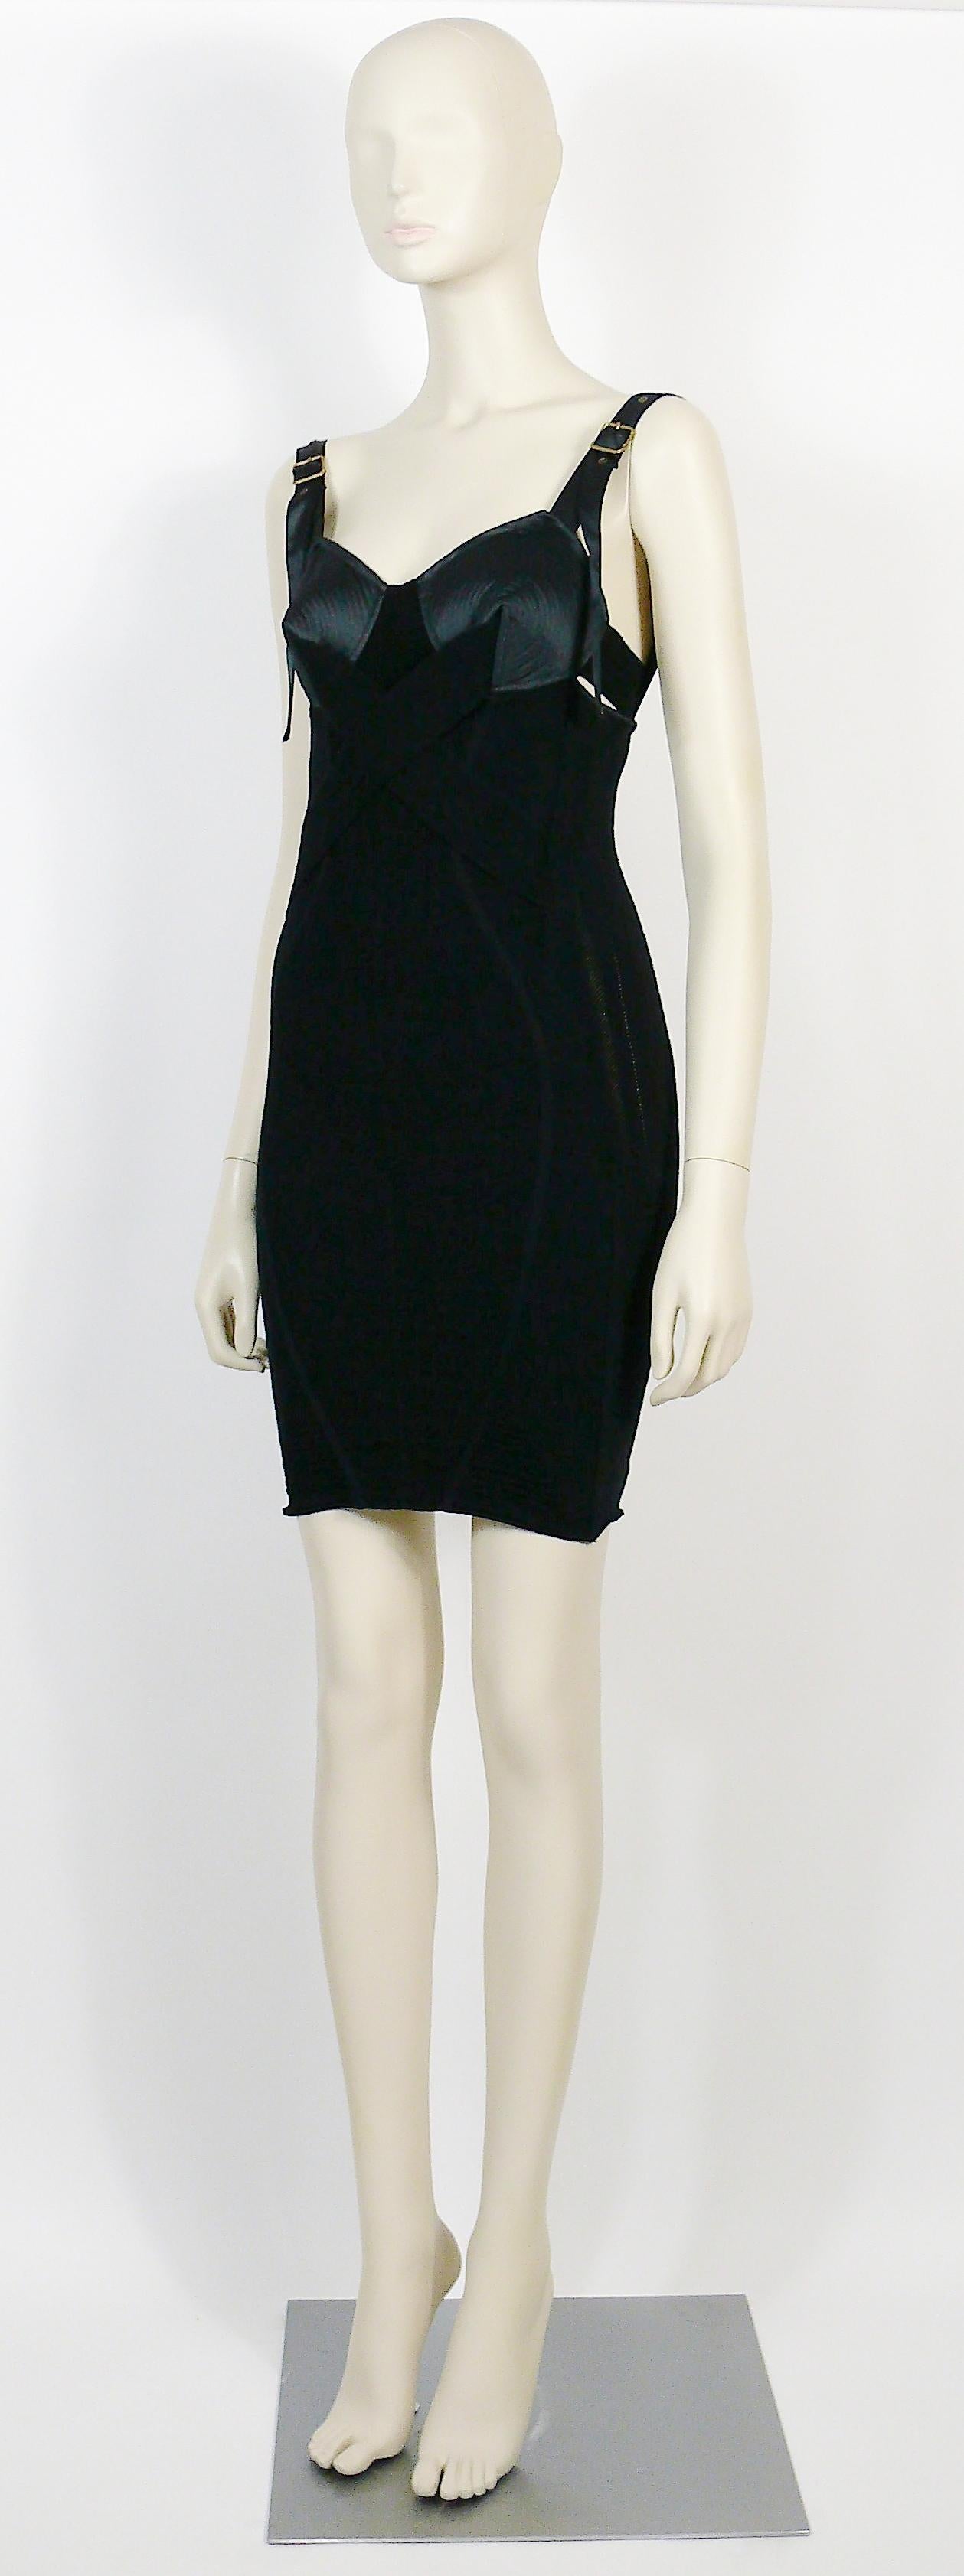 Jean Paul Gaultier Iconic Black Bondage Cone Bra Mini Bodycon Dress Size S In Excellent Condition For Sale In Nice, FR